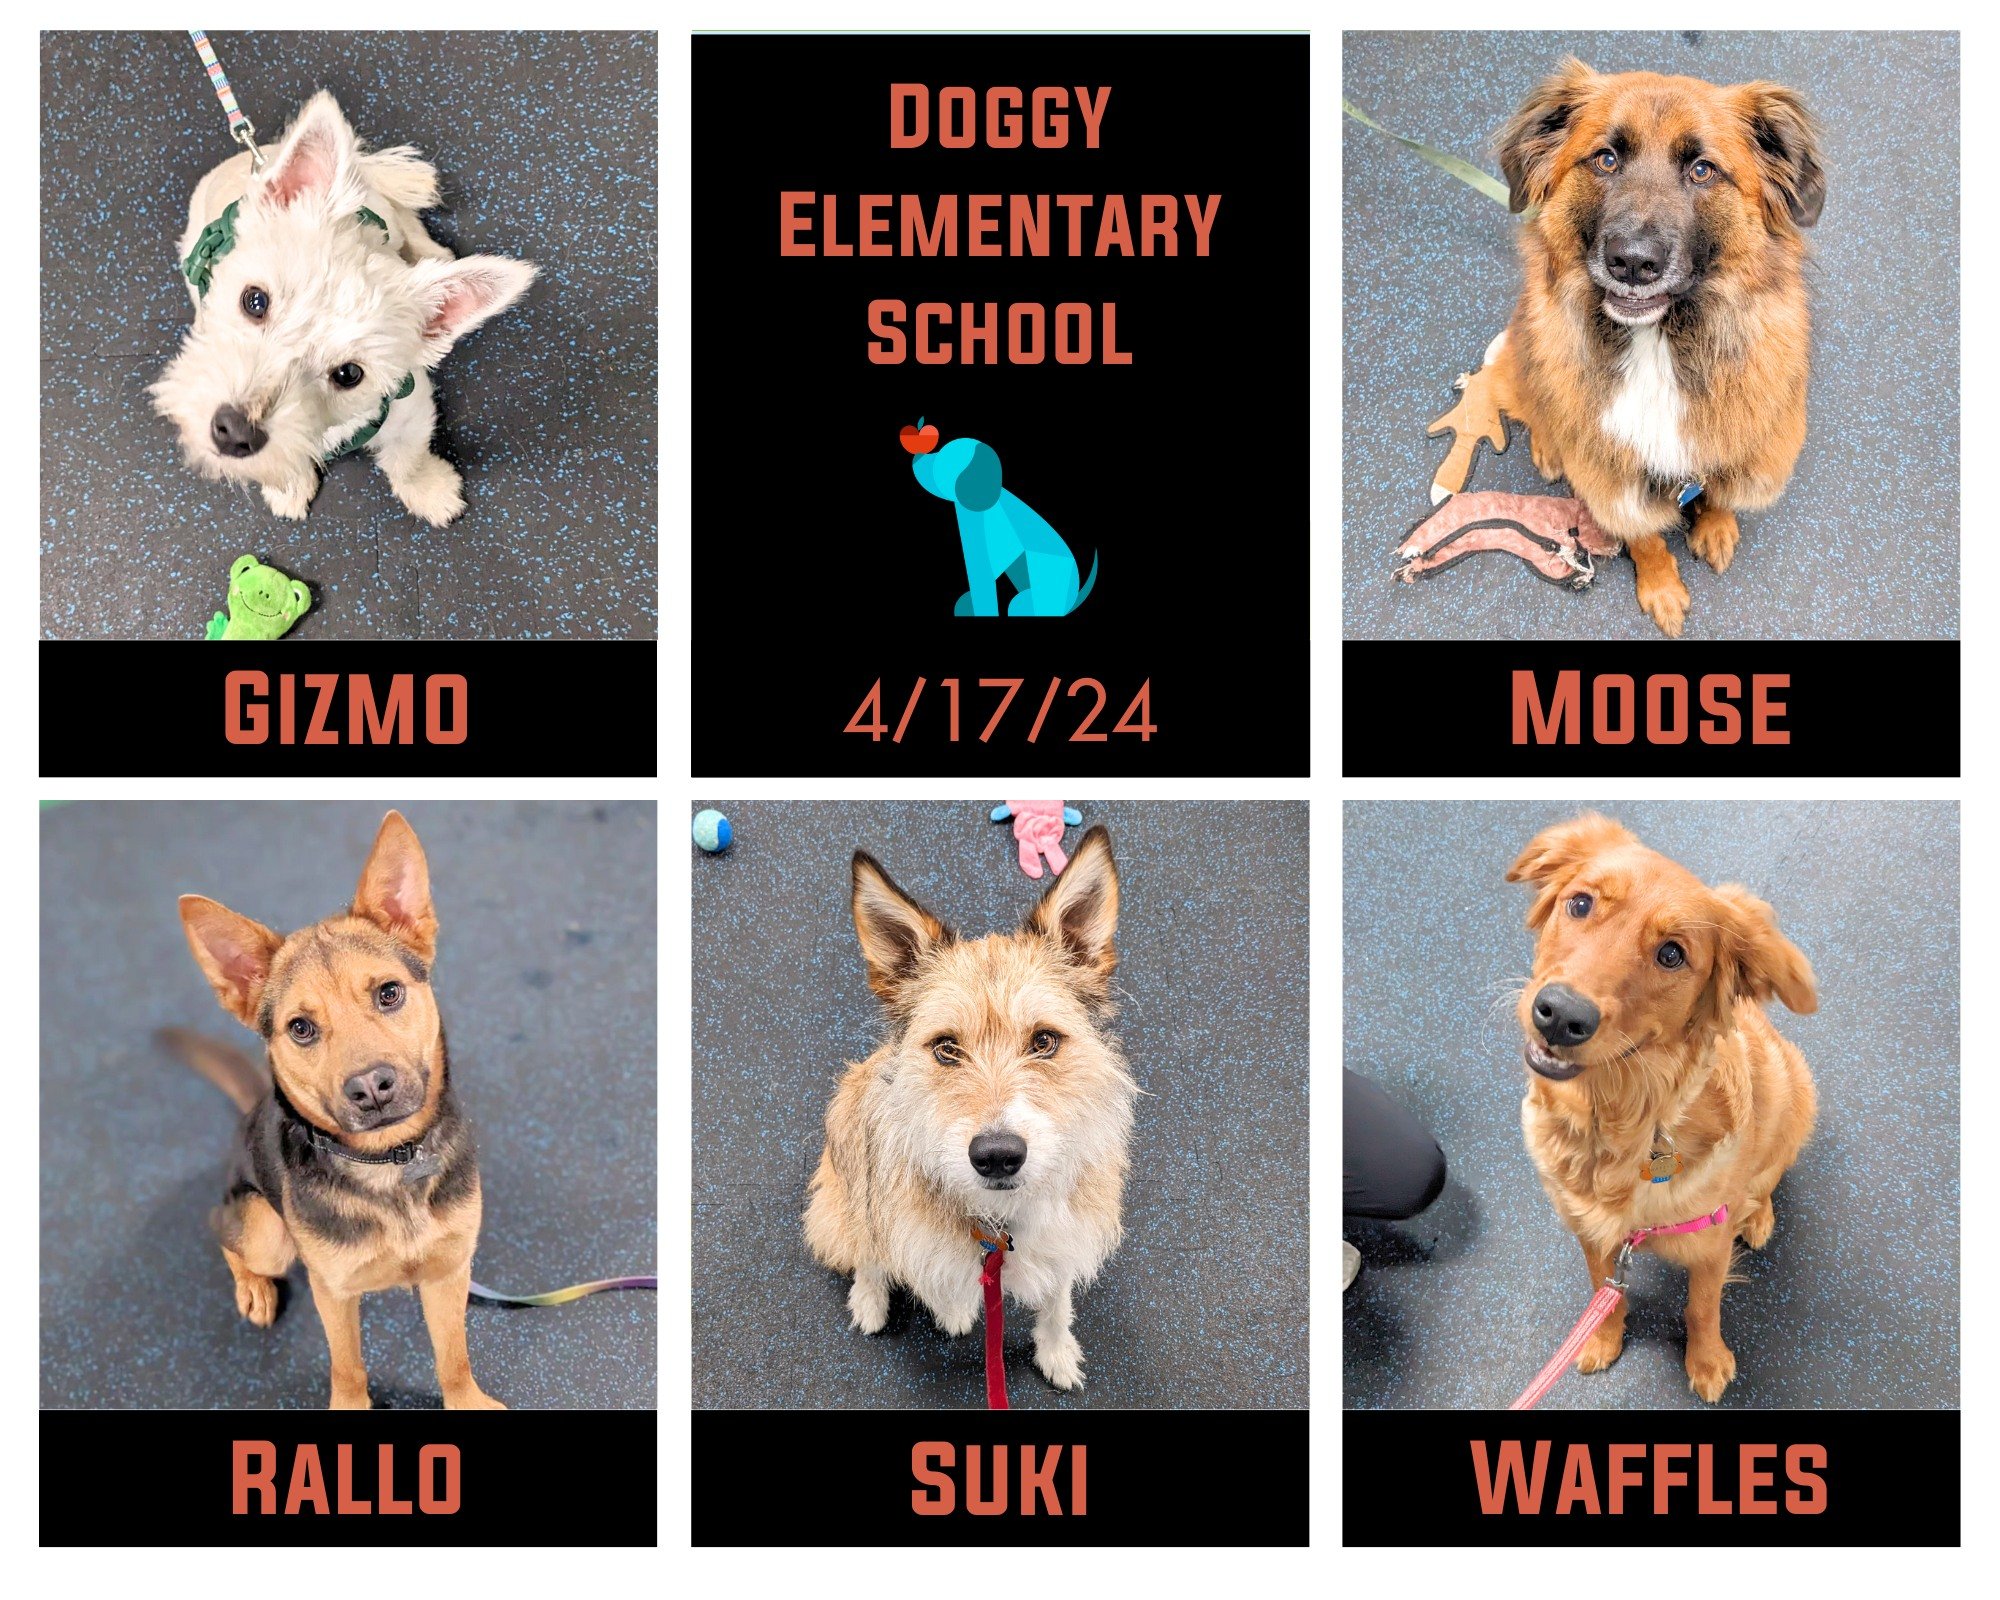 Roll out the red carpet for Gizmo, Moose, Suki, and Waffles in celebration of their graduation from Doggy Elementary School this past Wednesday night! 🎓🎓 Rallo is also celebrating as he was a foster through Fetch Wisconsin Rescue and attended class